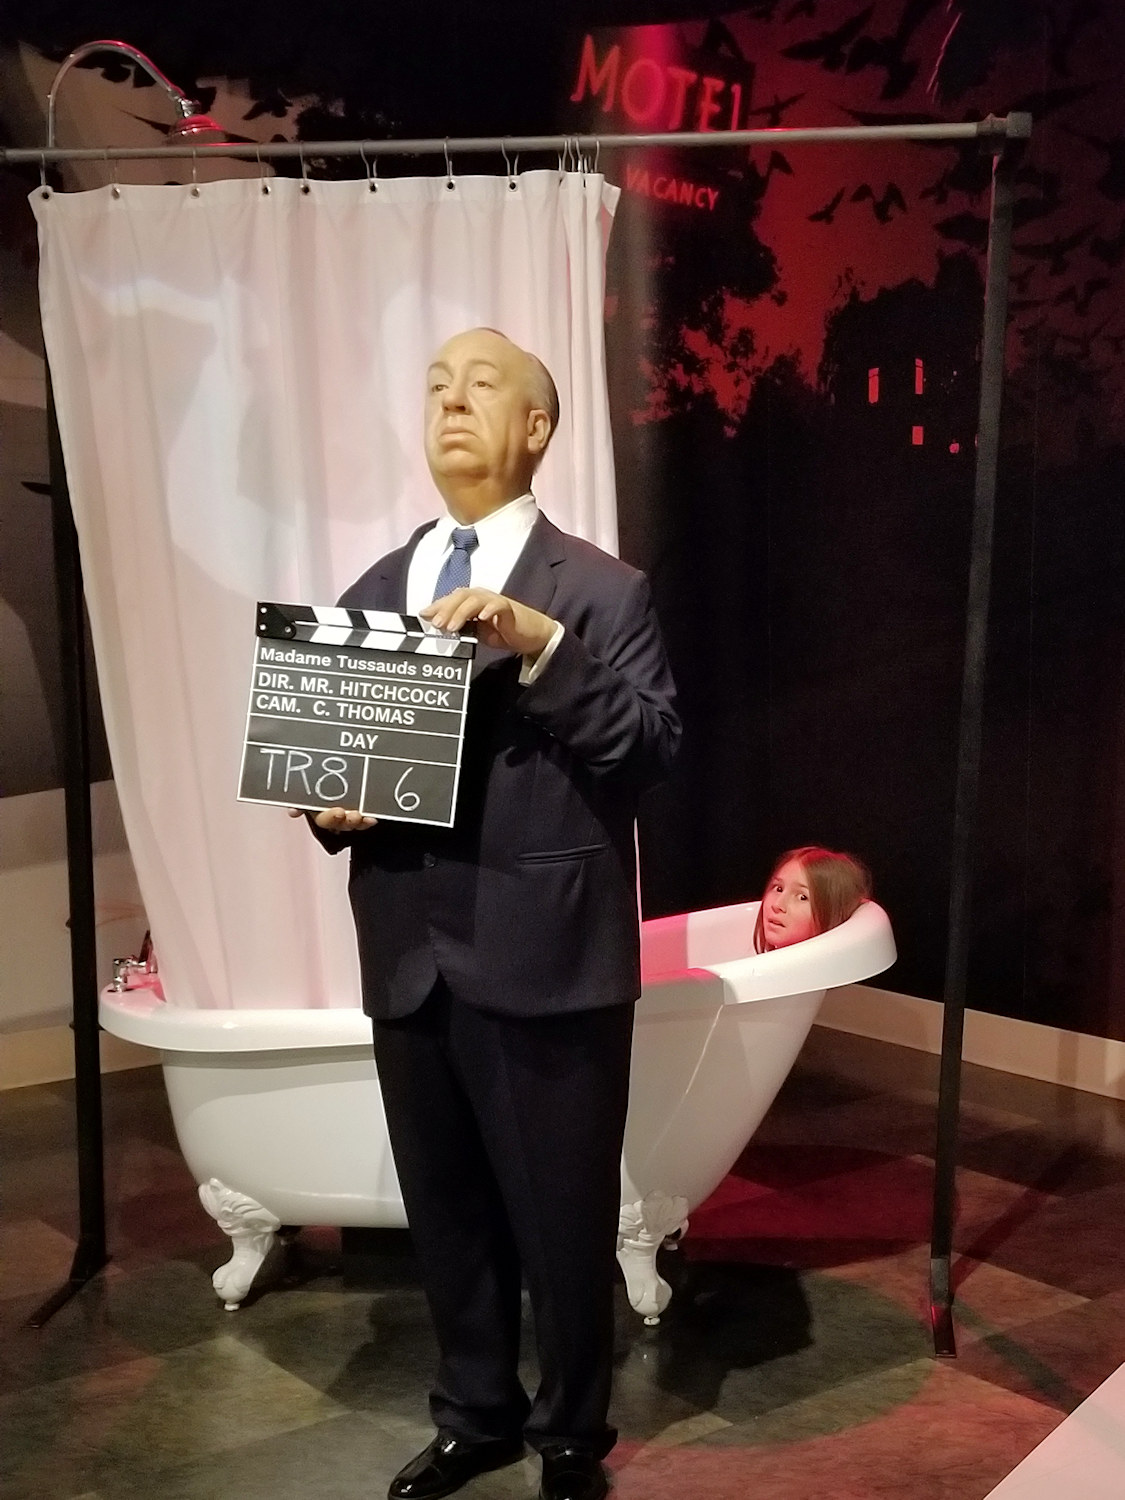 California, Los Angeles County, Hollywood, Madame Tussauds